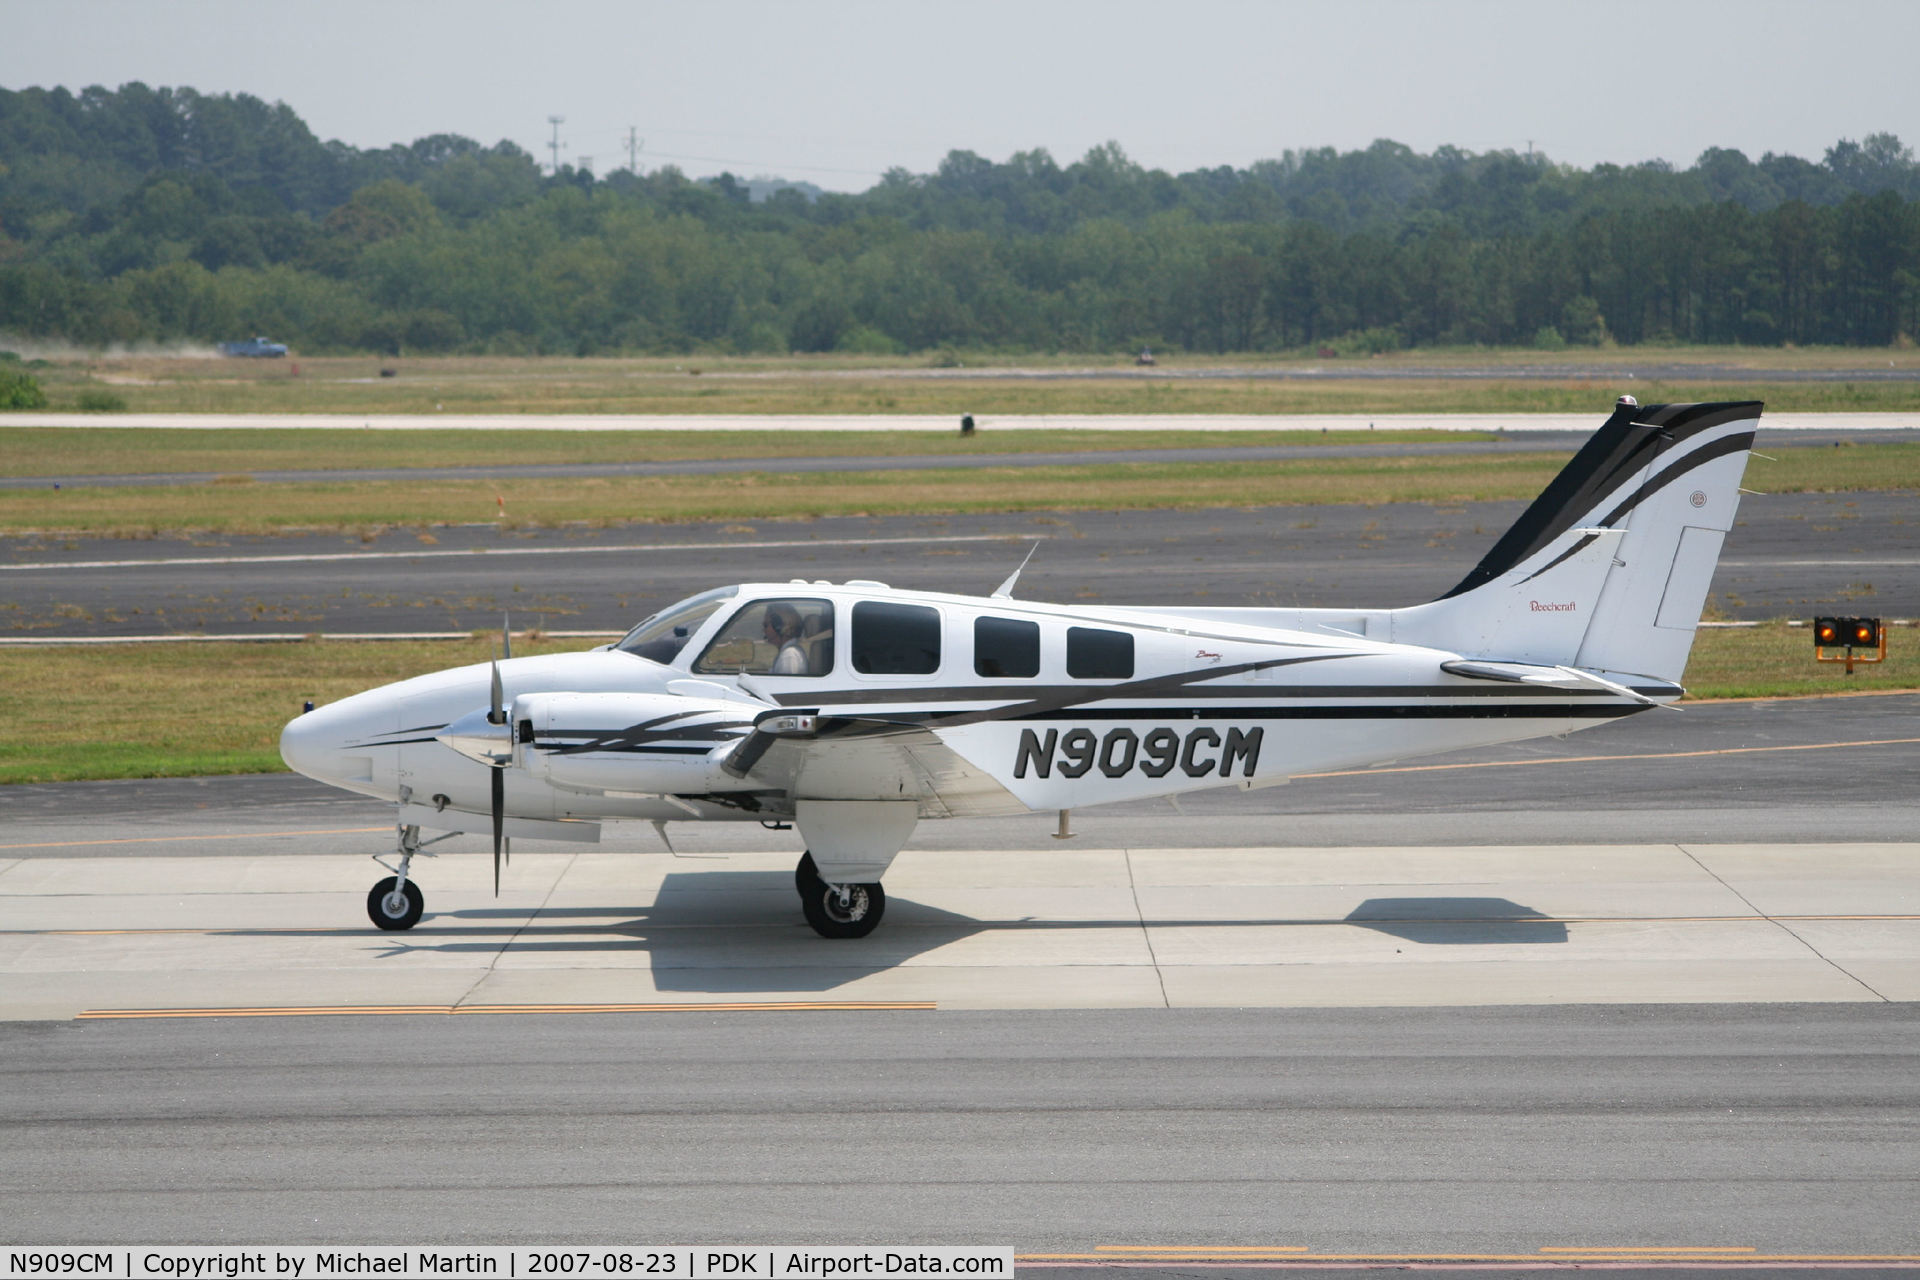 N909CM, 2001 Raytheon Aircraft Company 58 C/N TH-2022, Taxing to Epps Air Service